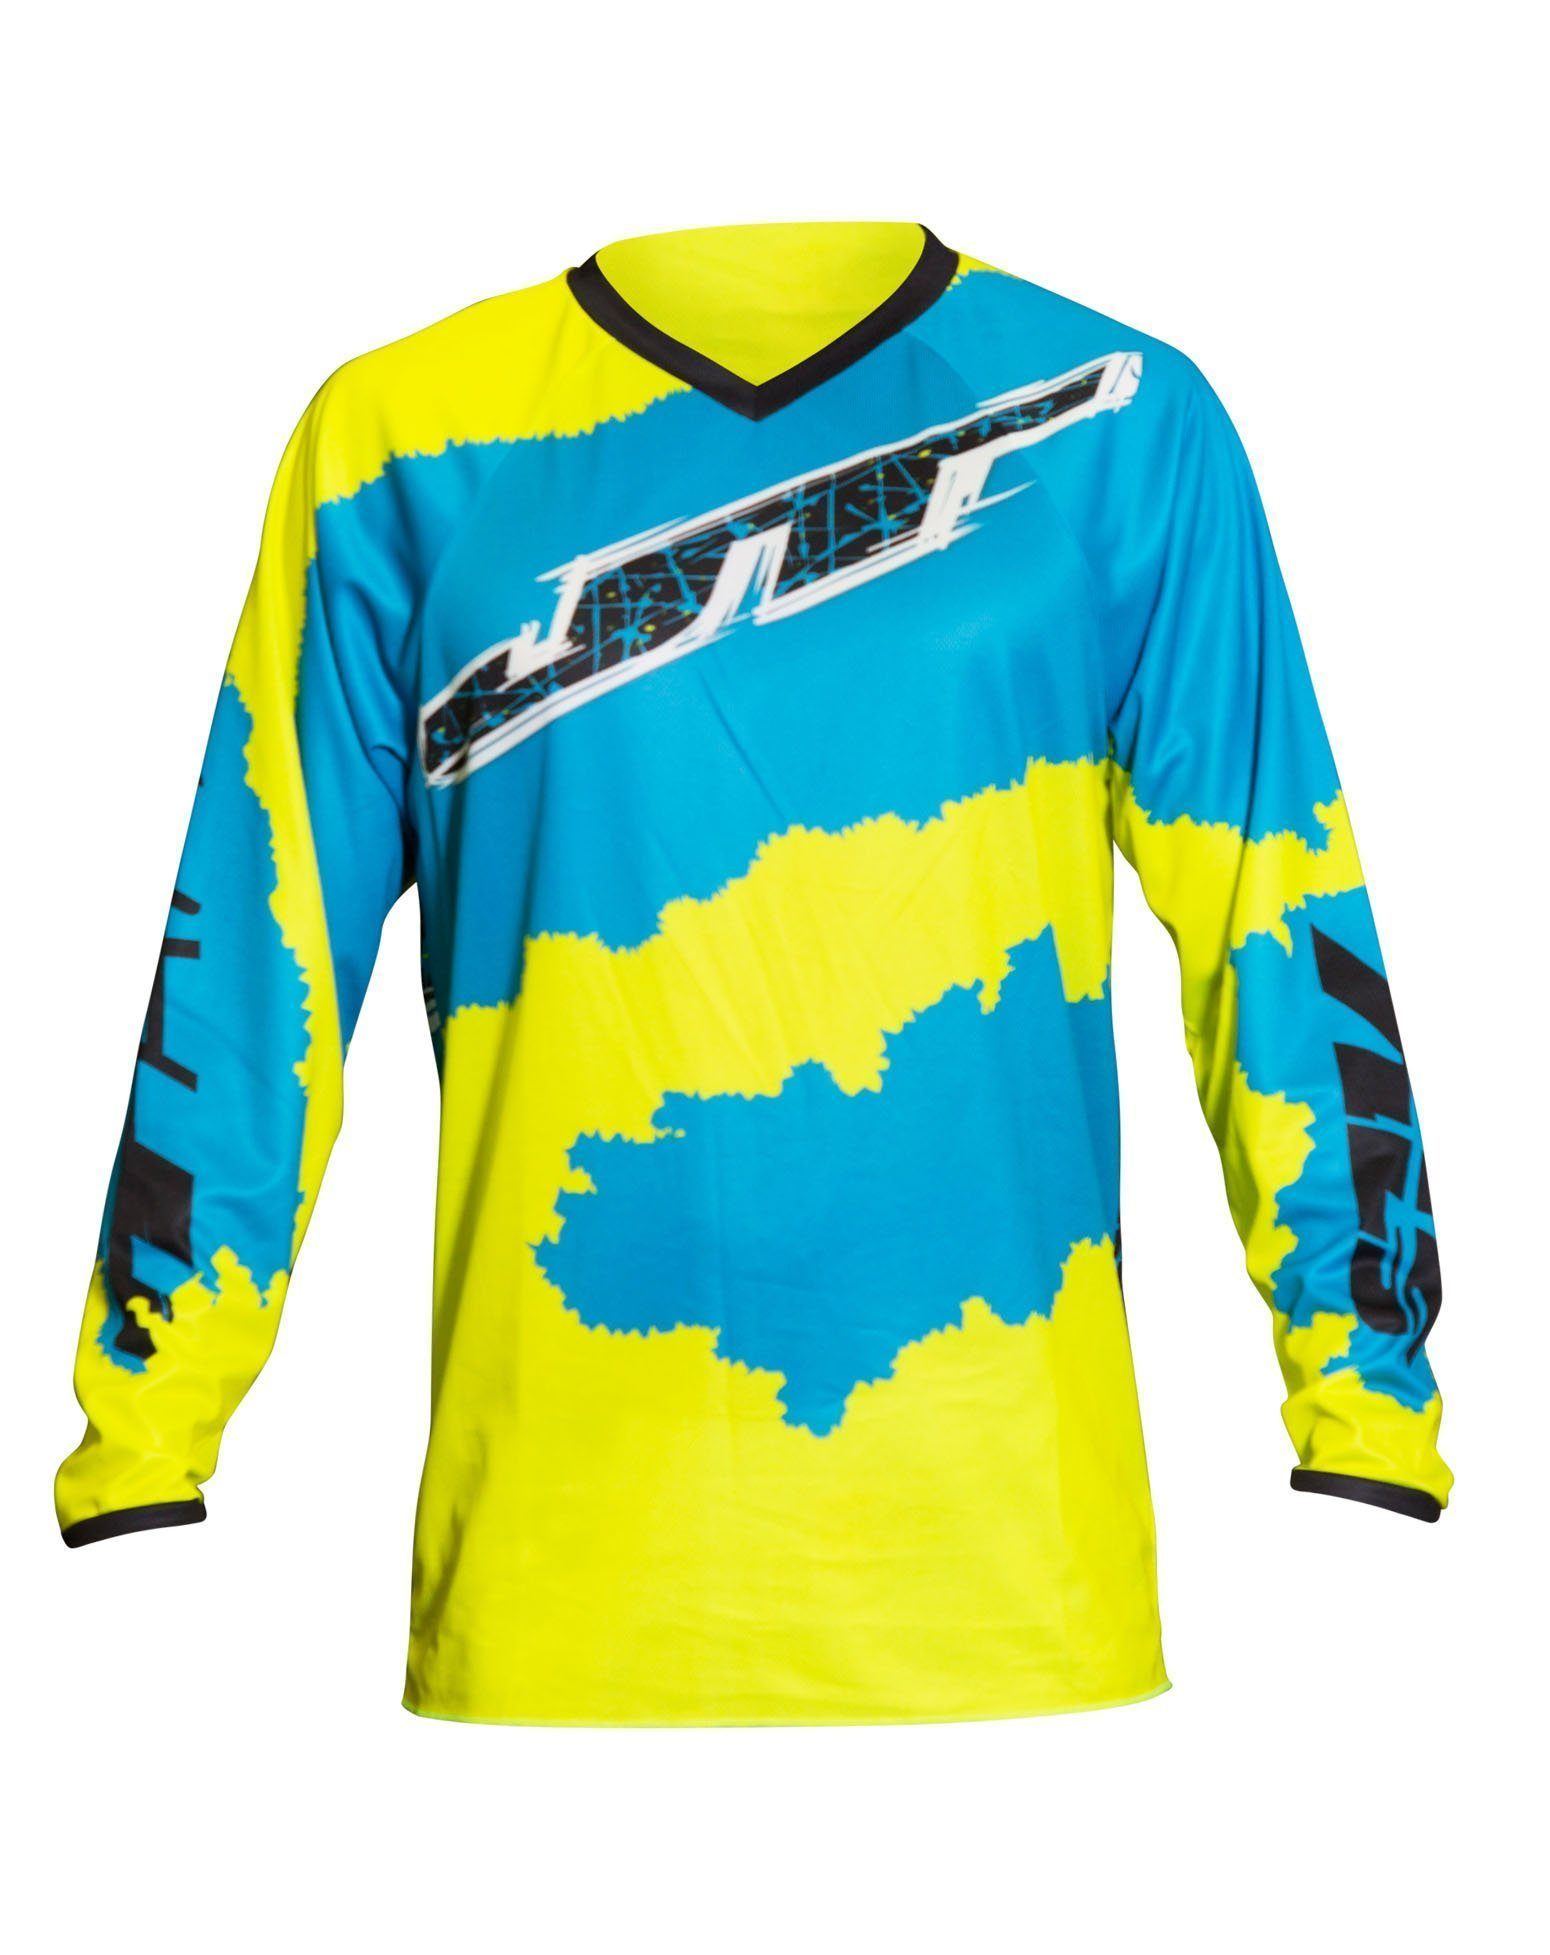 C4 Ripper Jersey NYCNBK